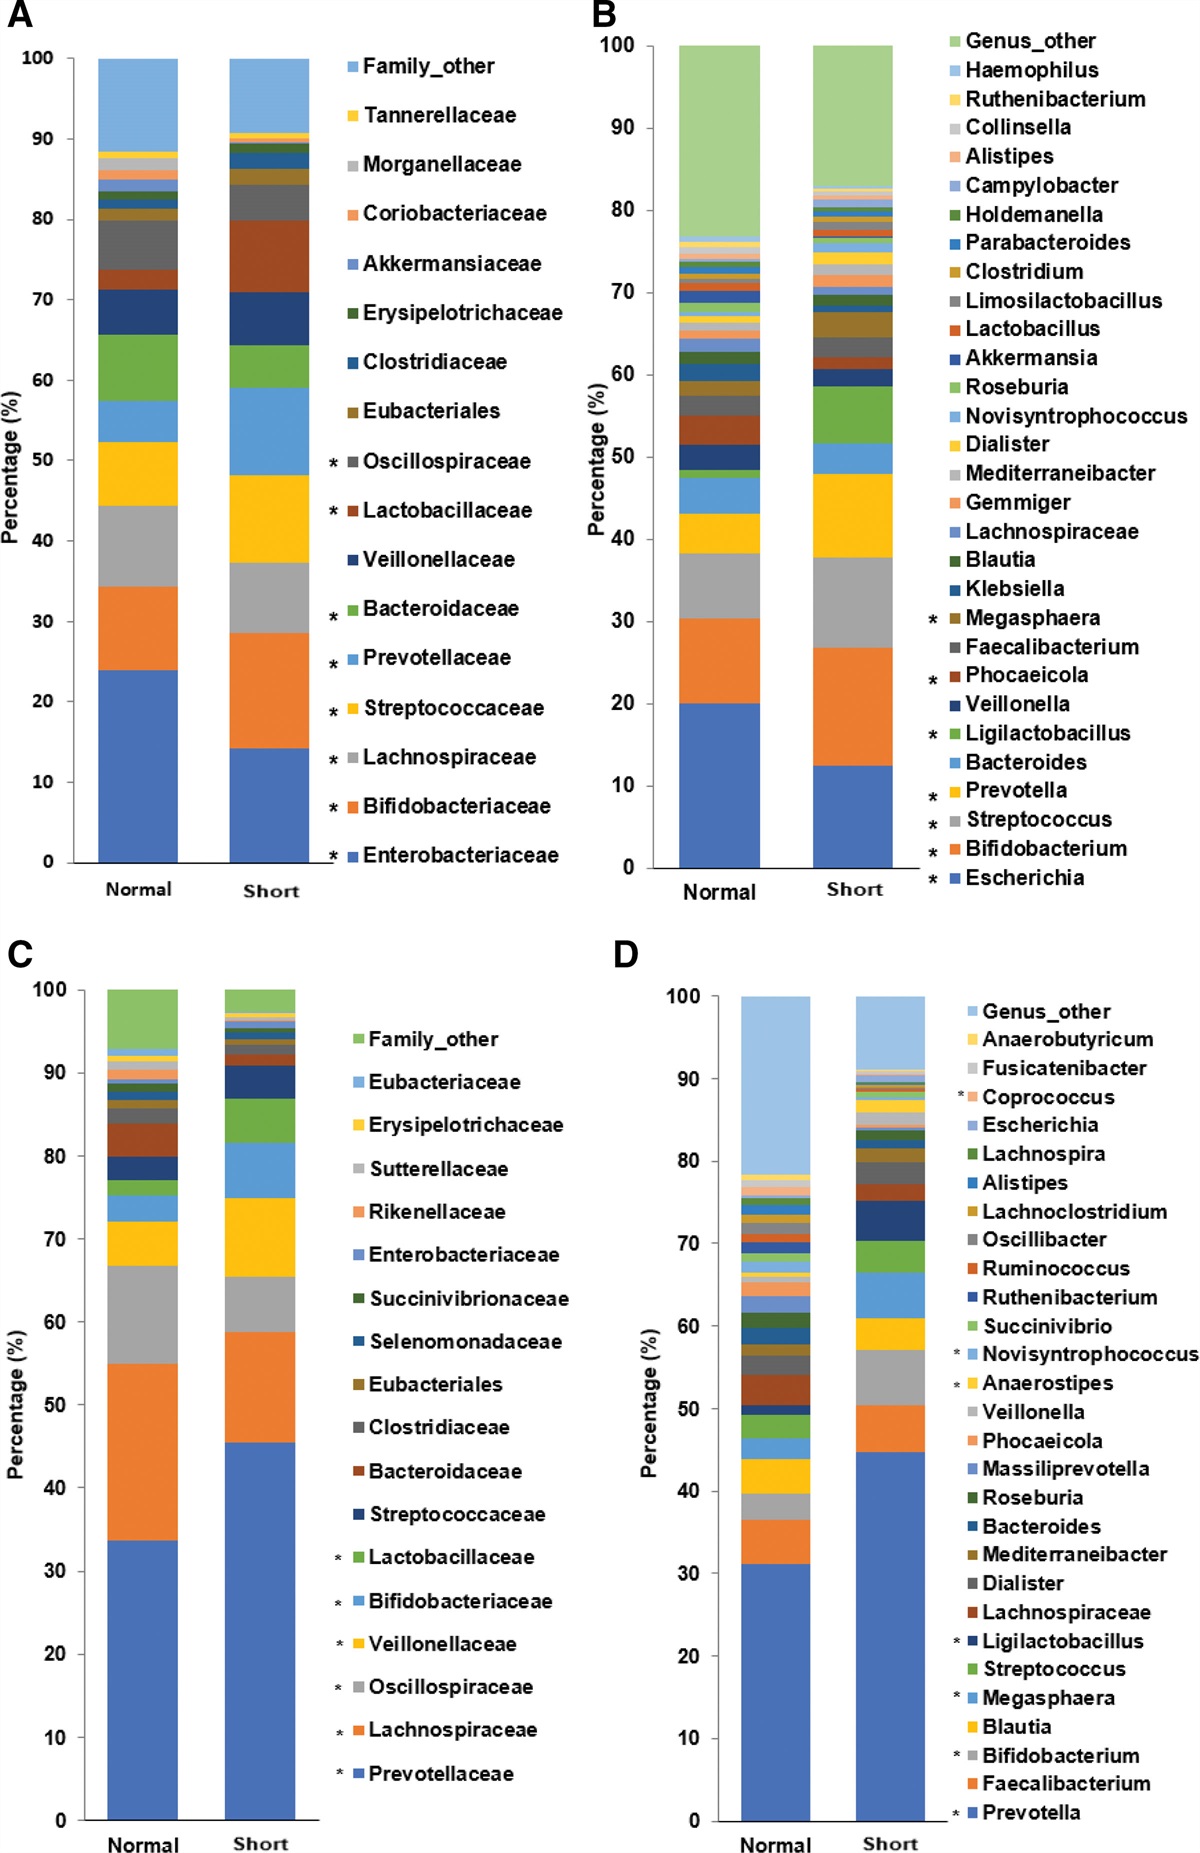 Association of Pooled Fecal Microbiota on Height Growth in Children According to Enterotypes